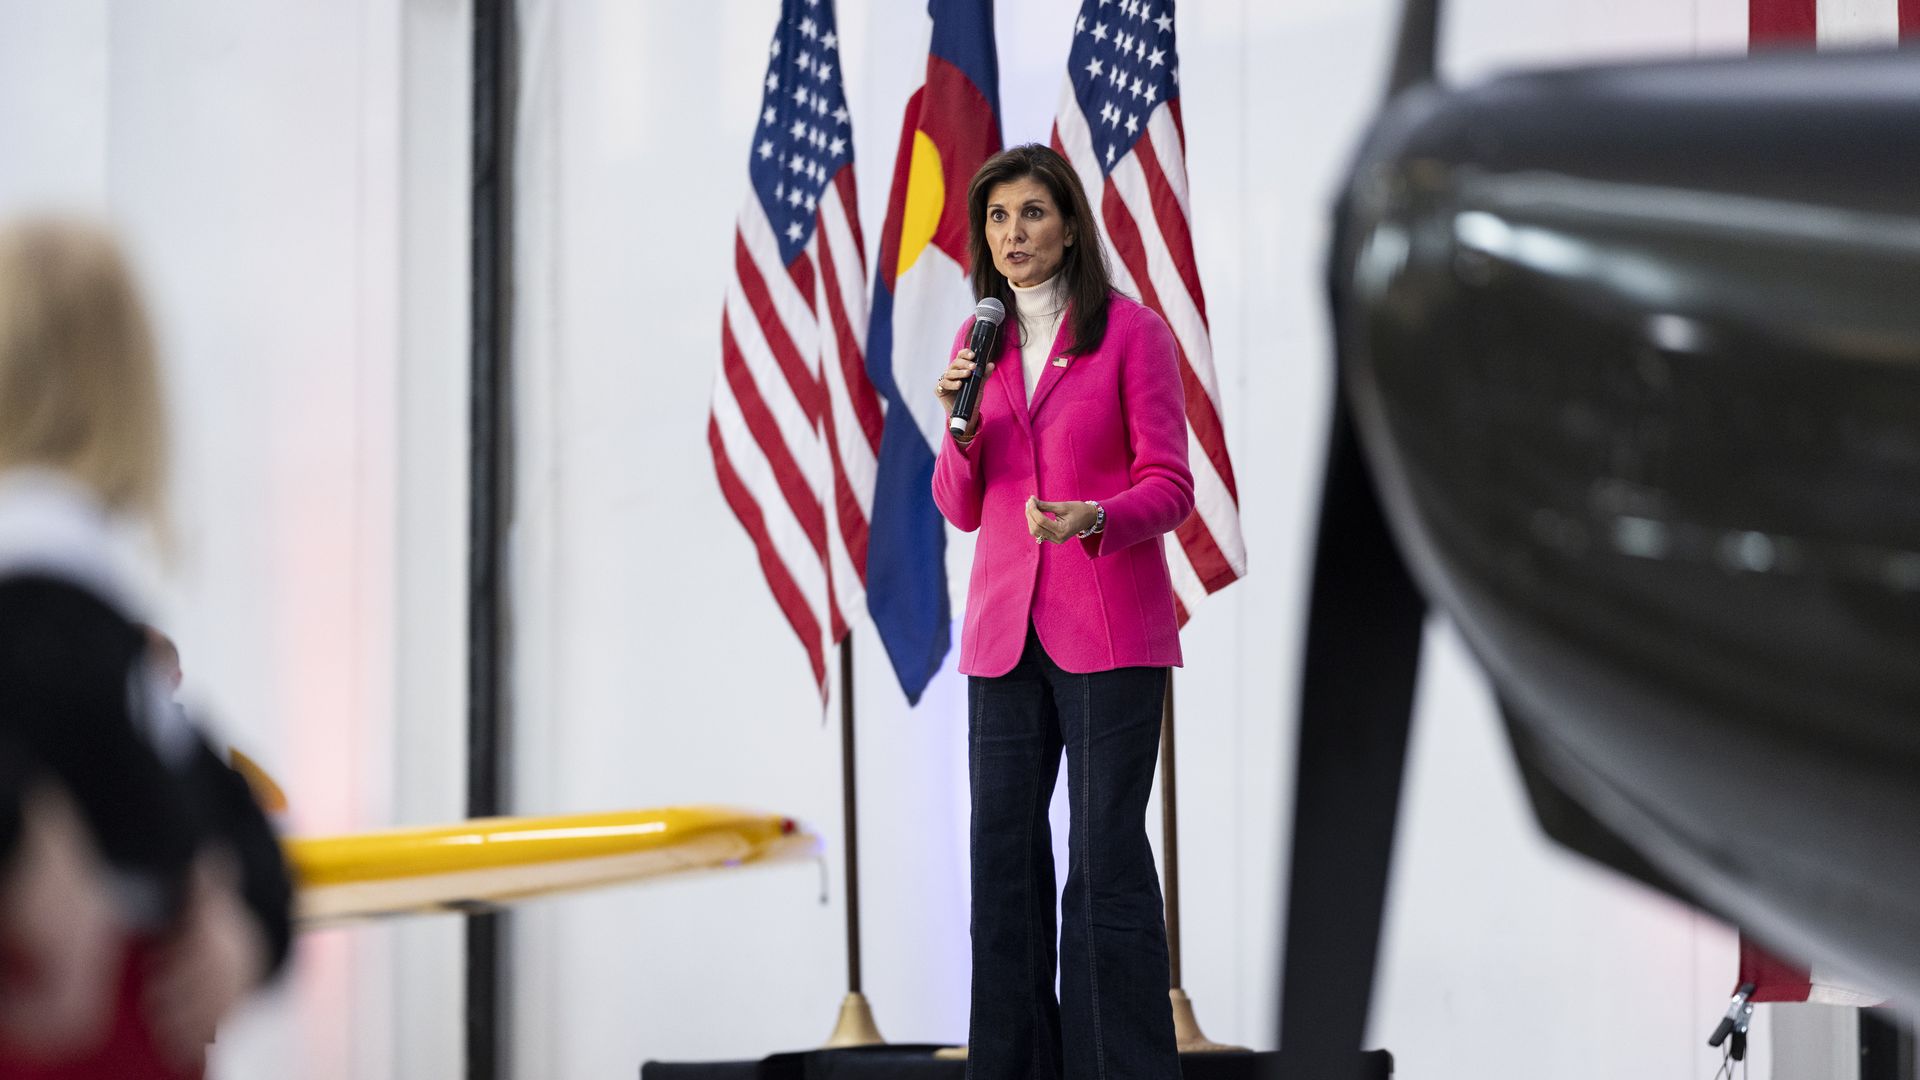 Republican presidential candidate, former U.N. ambassador Nikki Haley speaks at a campaign event at Wings Over the Rockies Exploration of Flight museum on February 27, 2024 in Centennial, Colorado.